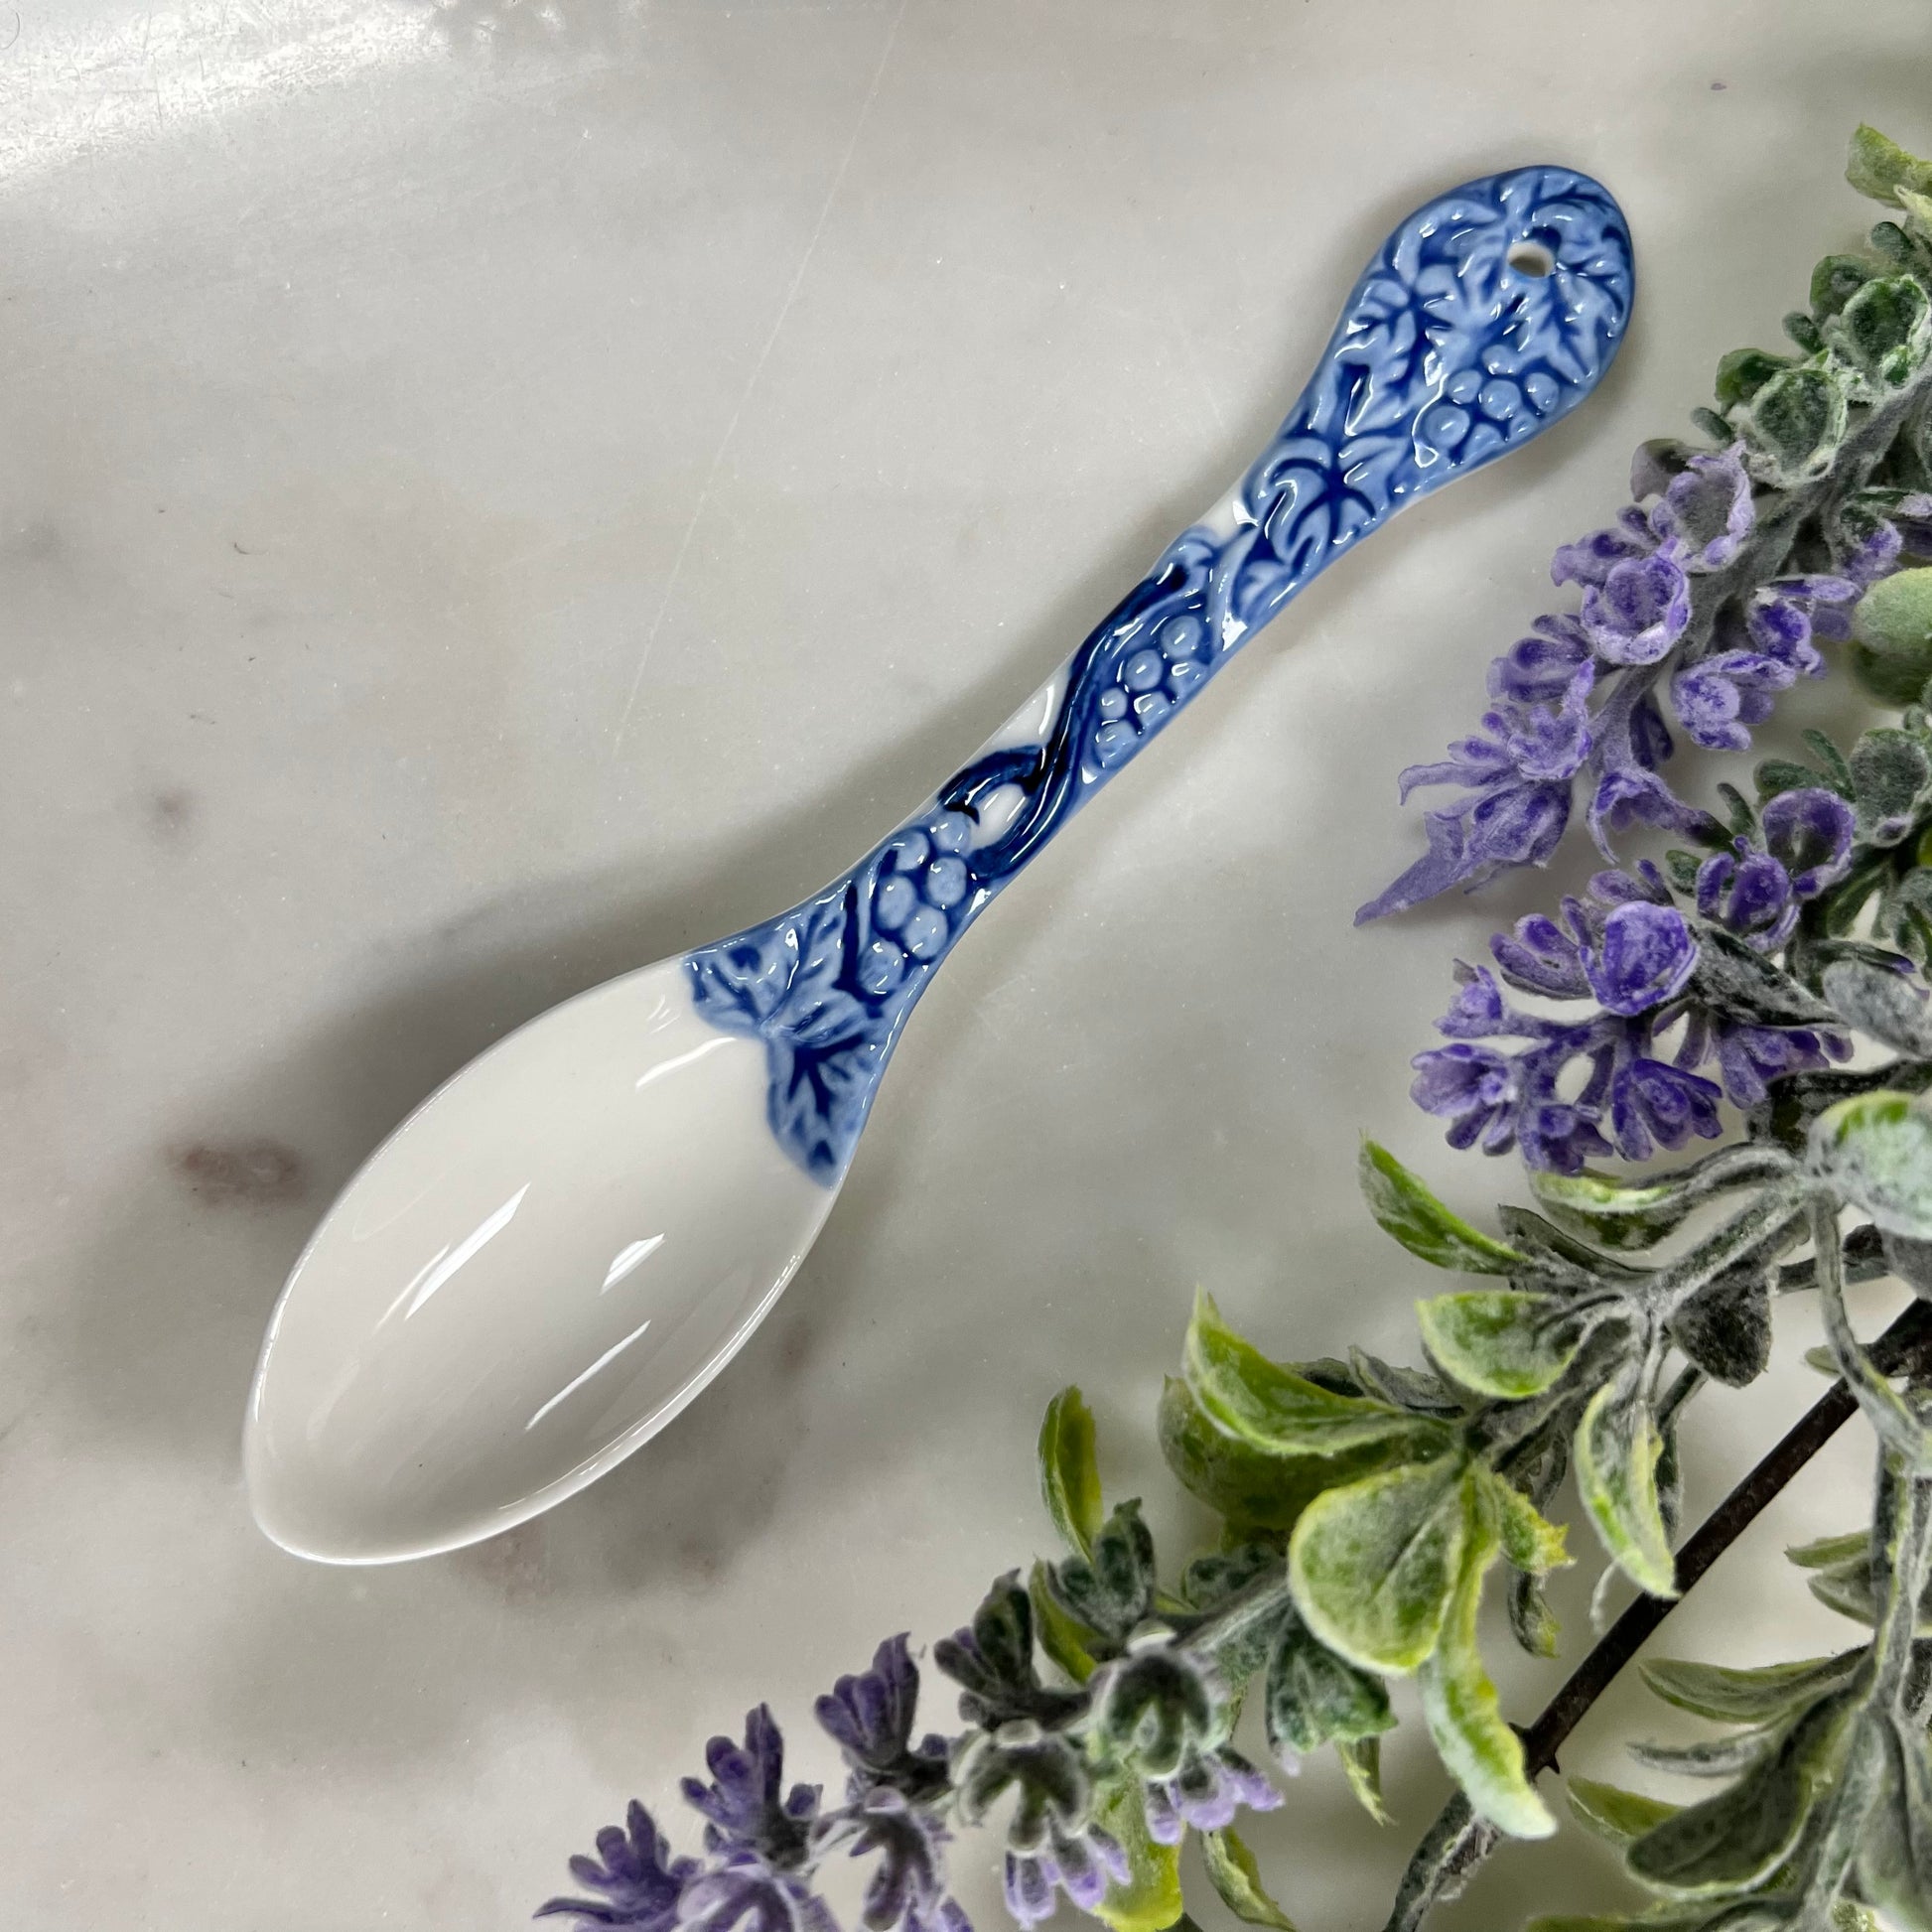 blue and white spoon with grape design on handle.